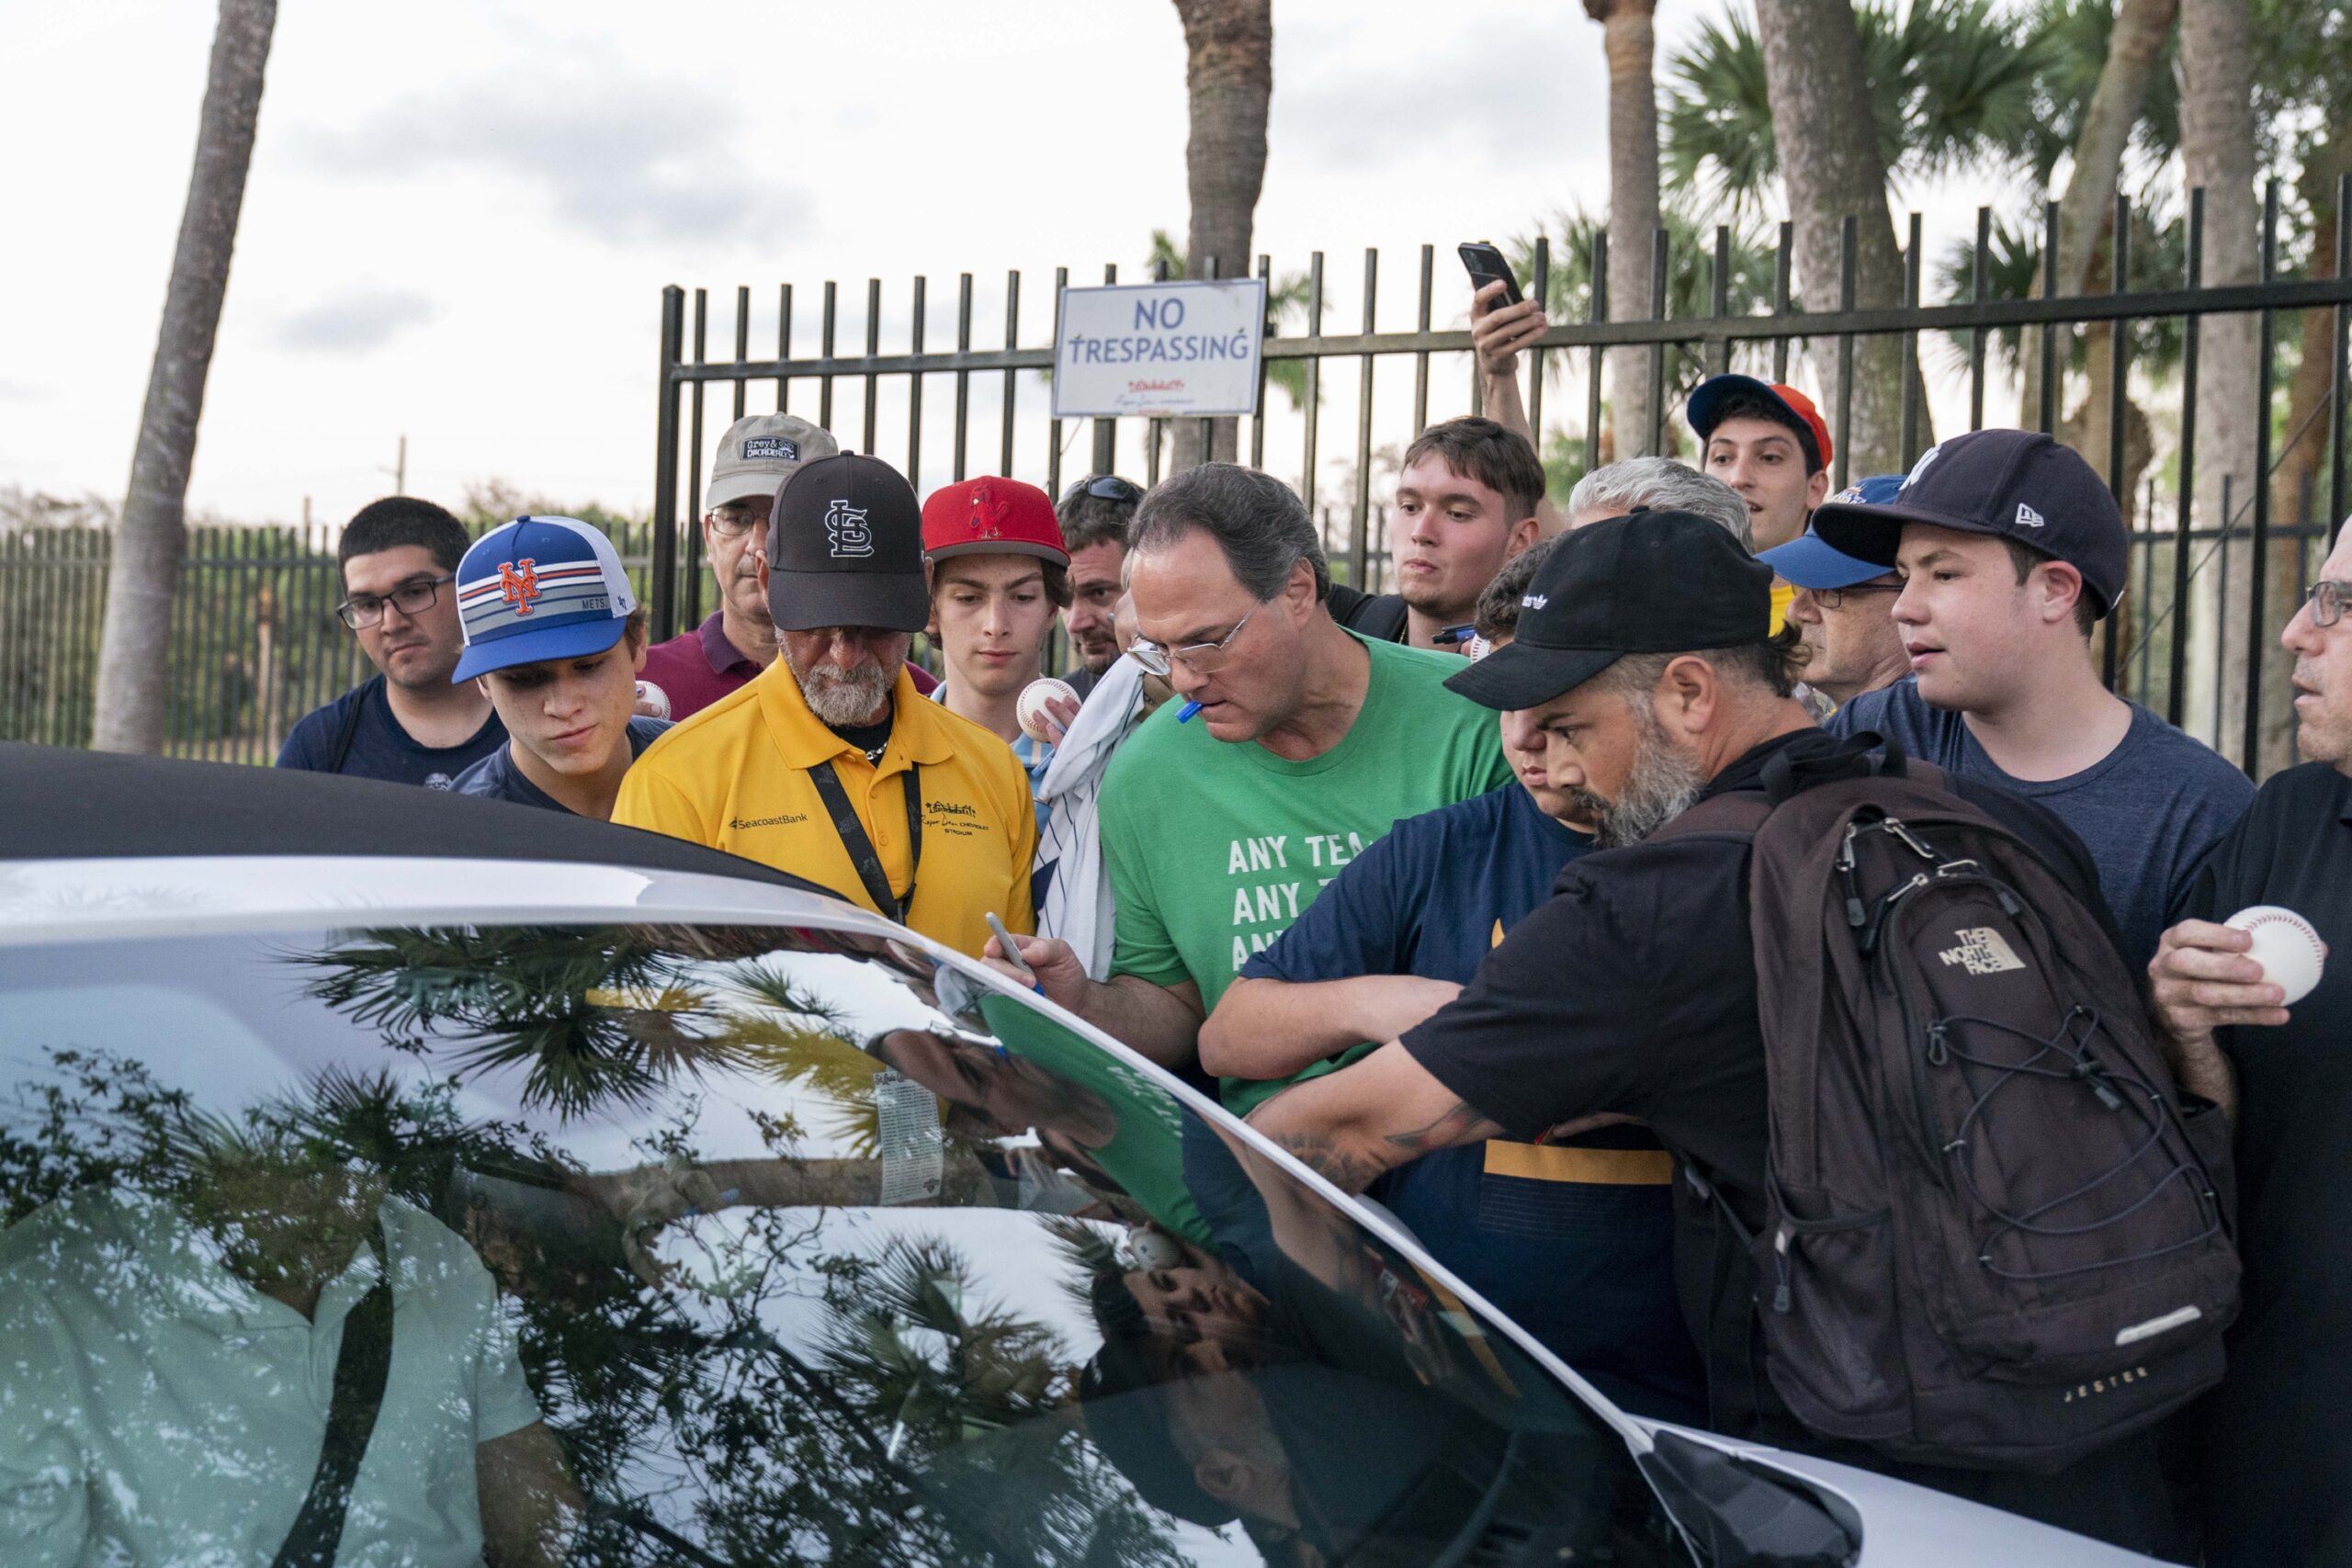 Baseball fans crowd around a car to get autographs from New York Yankees pitcher Gerrit Cole at Roger Dean Stadium in Jupiter, Florida on Feb. 23, 2022. (Greg Lovett/USA TODAY)